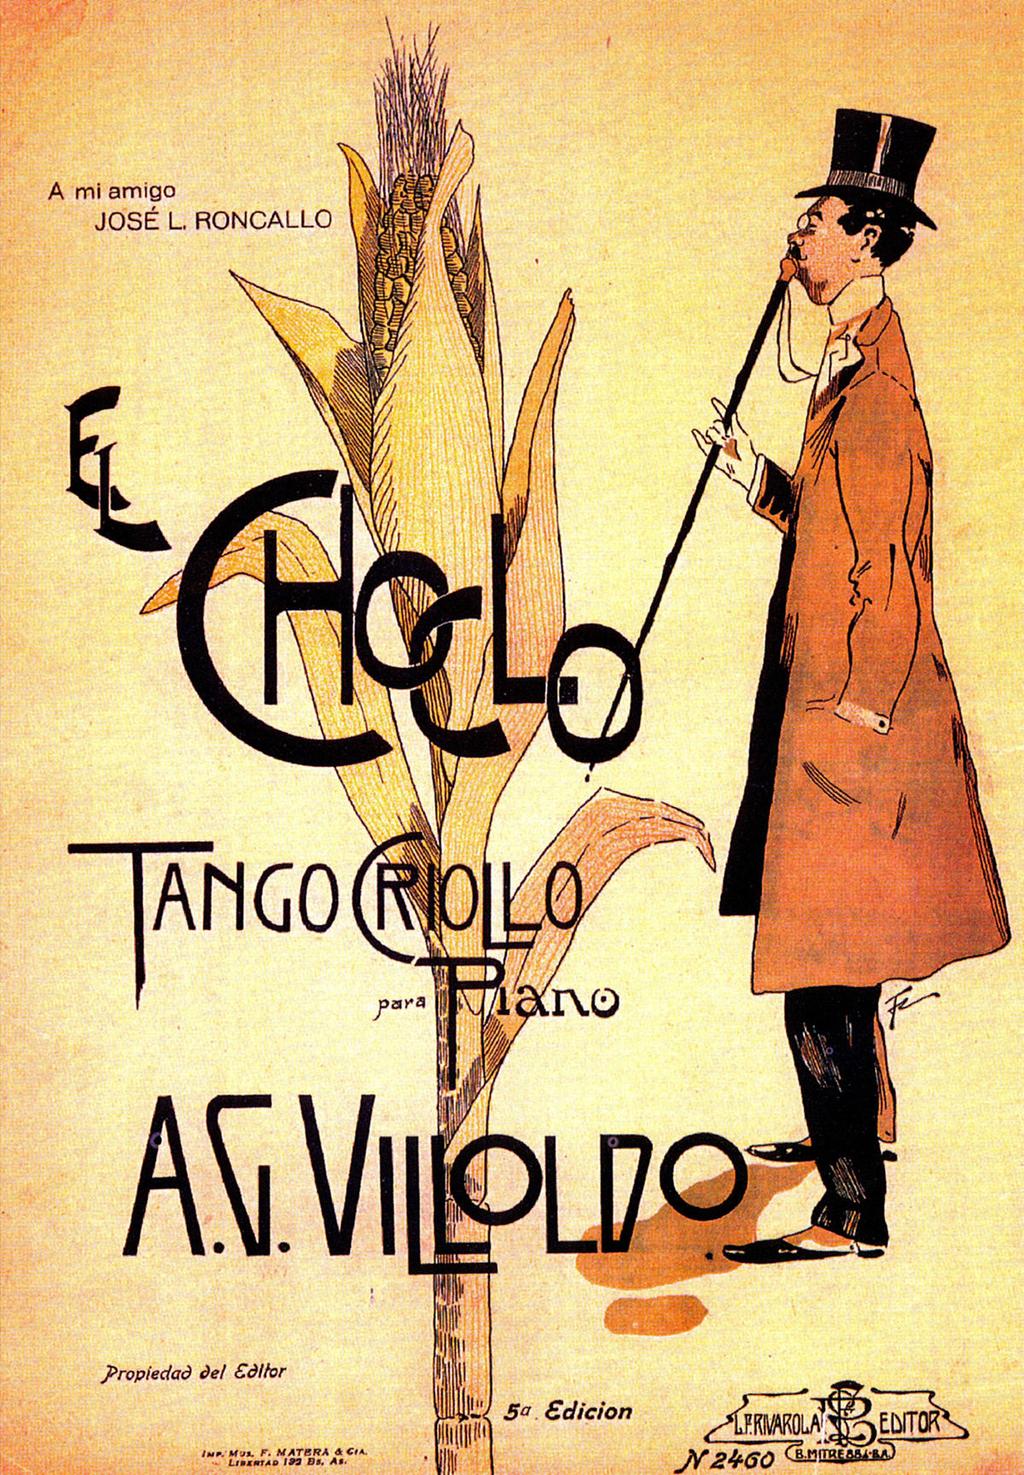 "El Choclo" 69 "El Choclo" "El Choclo" ("The Corn Cob") Sheet music for "El Choclo" Written by Ángel Villoldo Published 1903 Language Form Recorded by Spanish Tango Georgia Gibbs, Louis Armstrong,